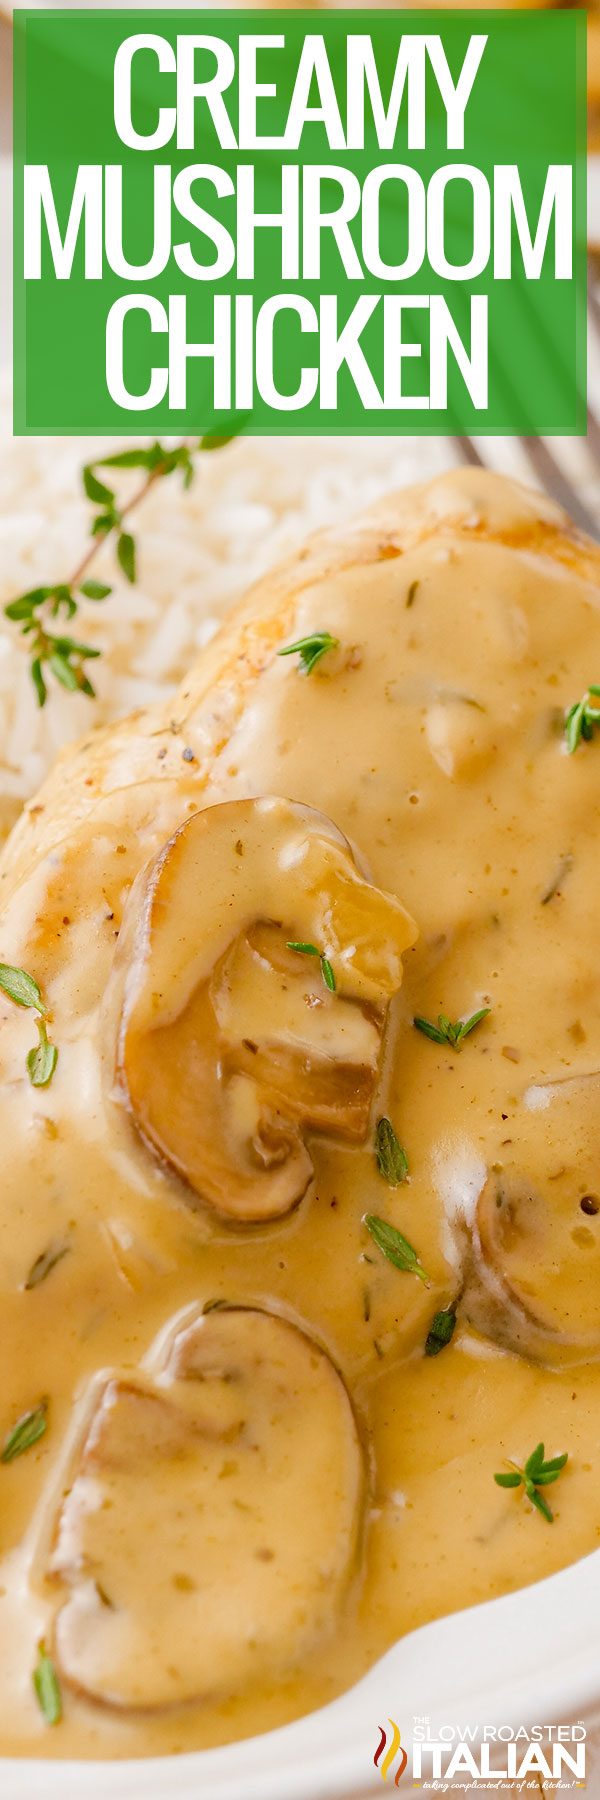 titled image (and shown): creamy mushroom chicken